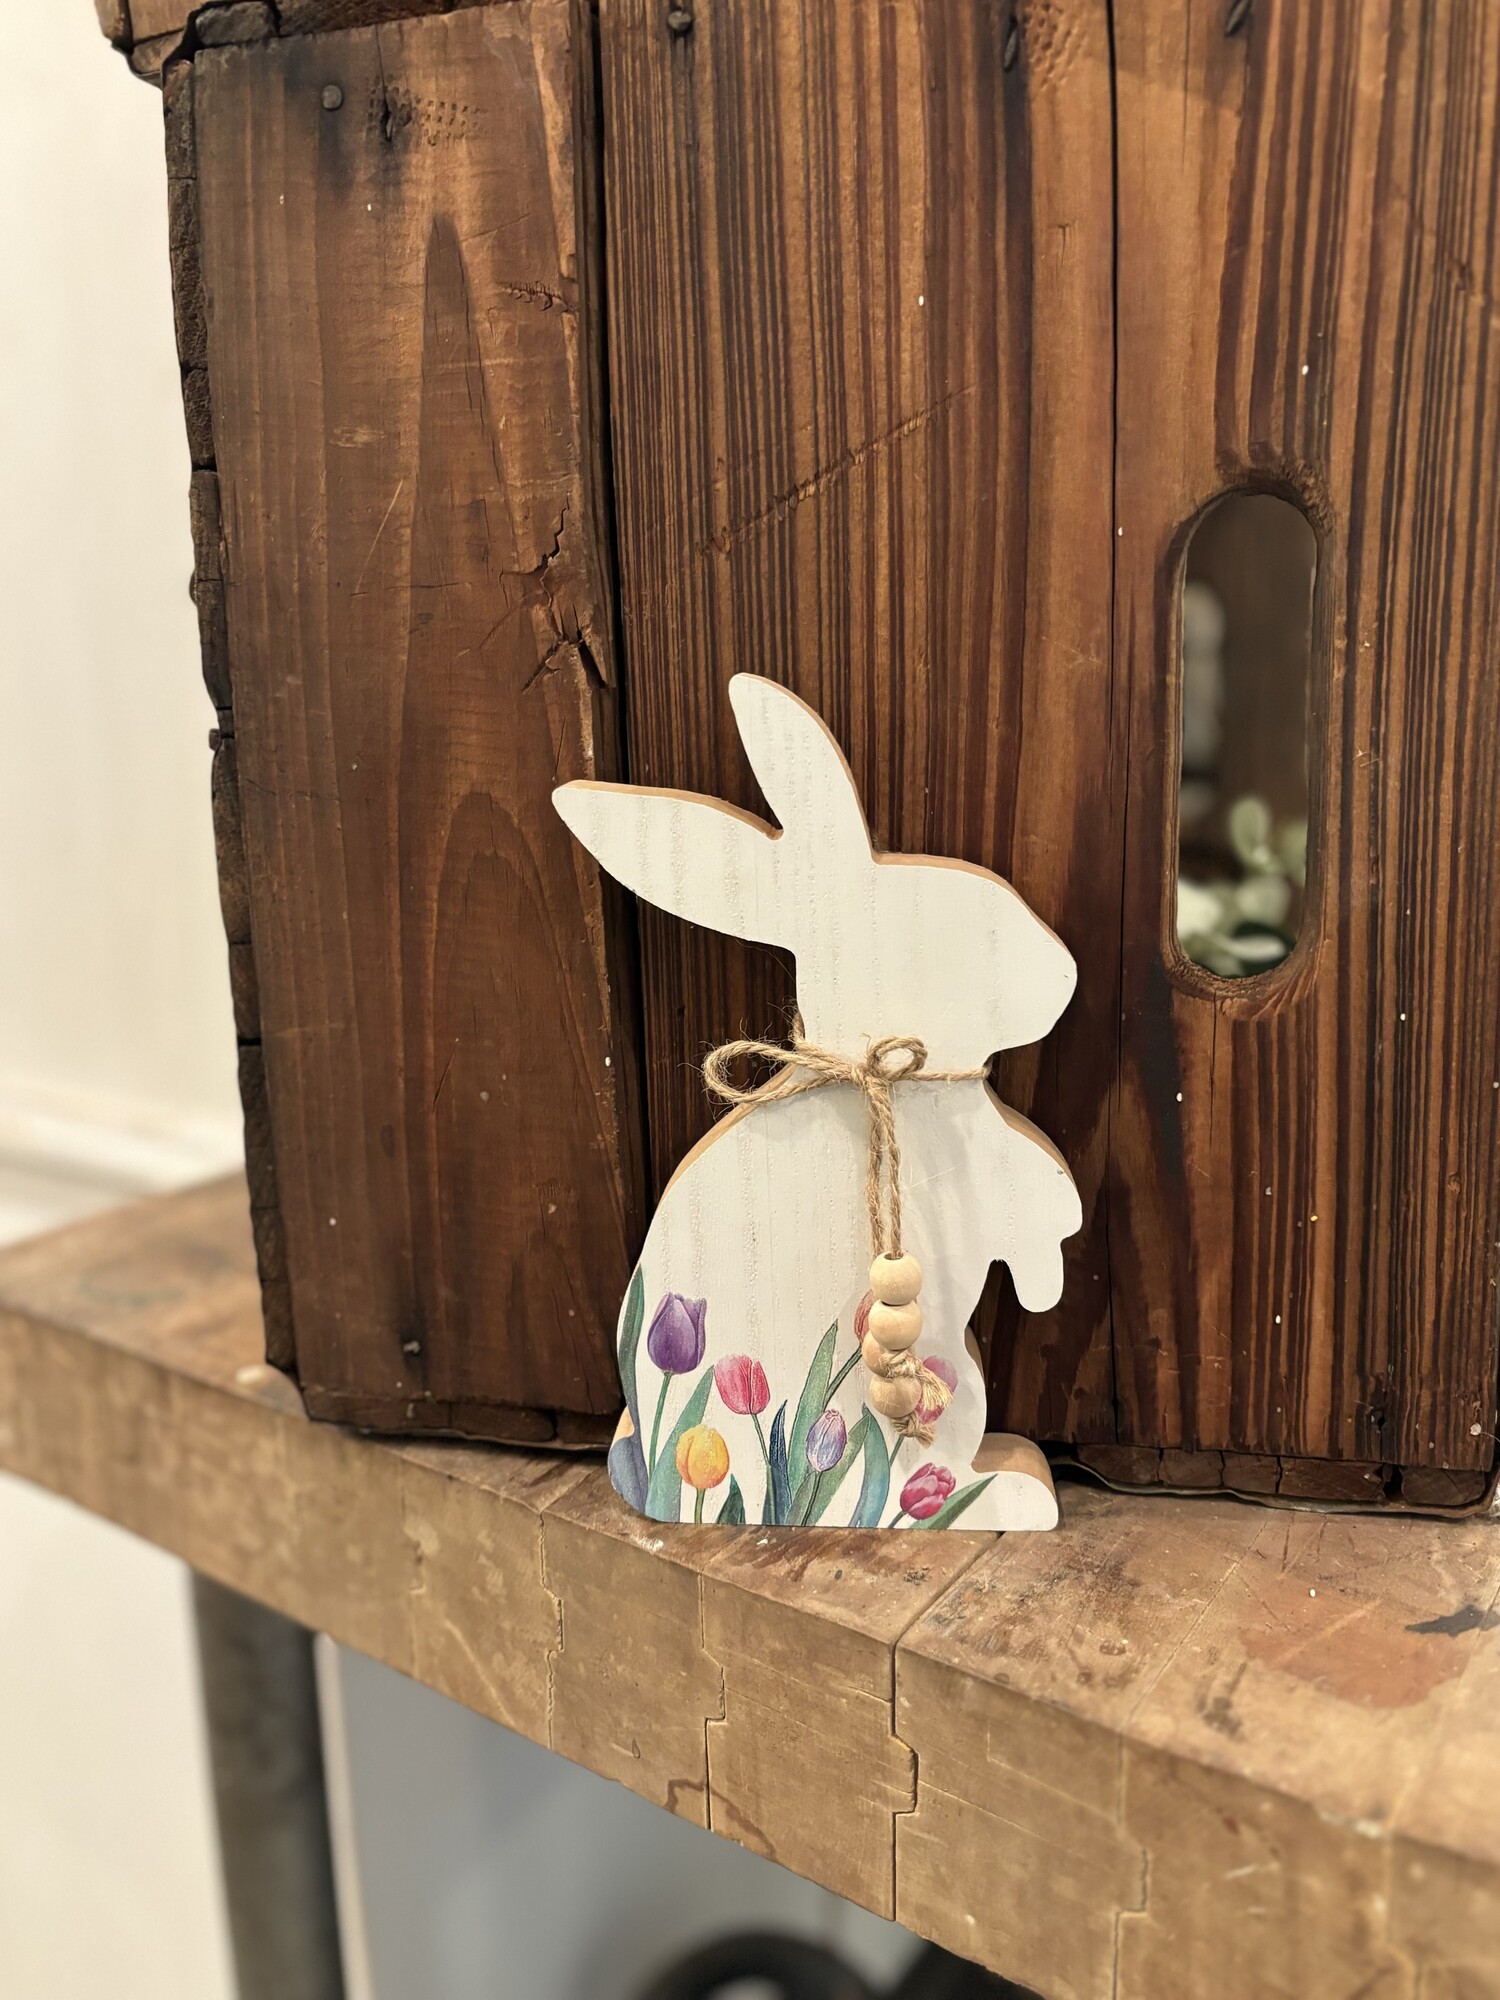 The Tulip Bunny is an adorable addiition to your spring and Easter decor. The bunny is painted a distressed white and has colorful tulips with a jute rope and beads tied around his neck. This bunny measures 8 inches high by 4.5 inches wide and .75 in deep